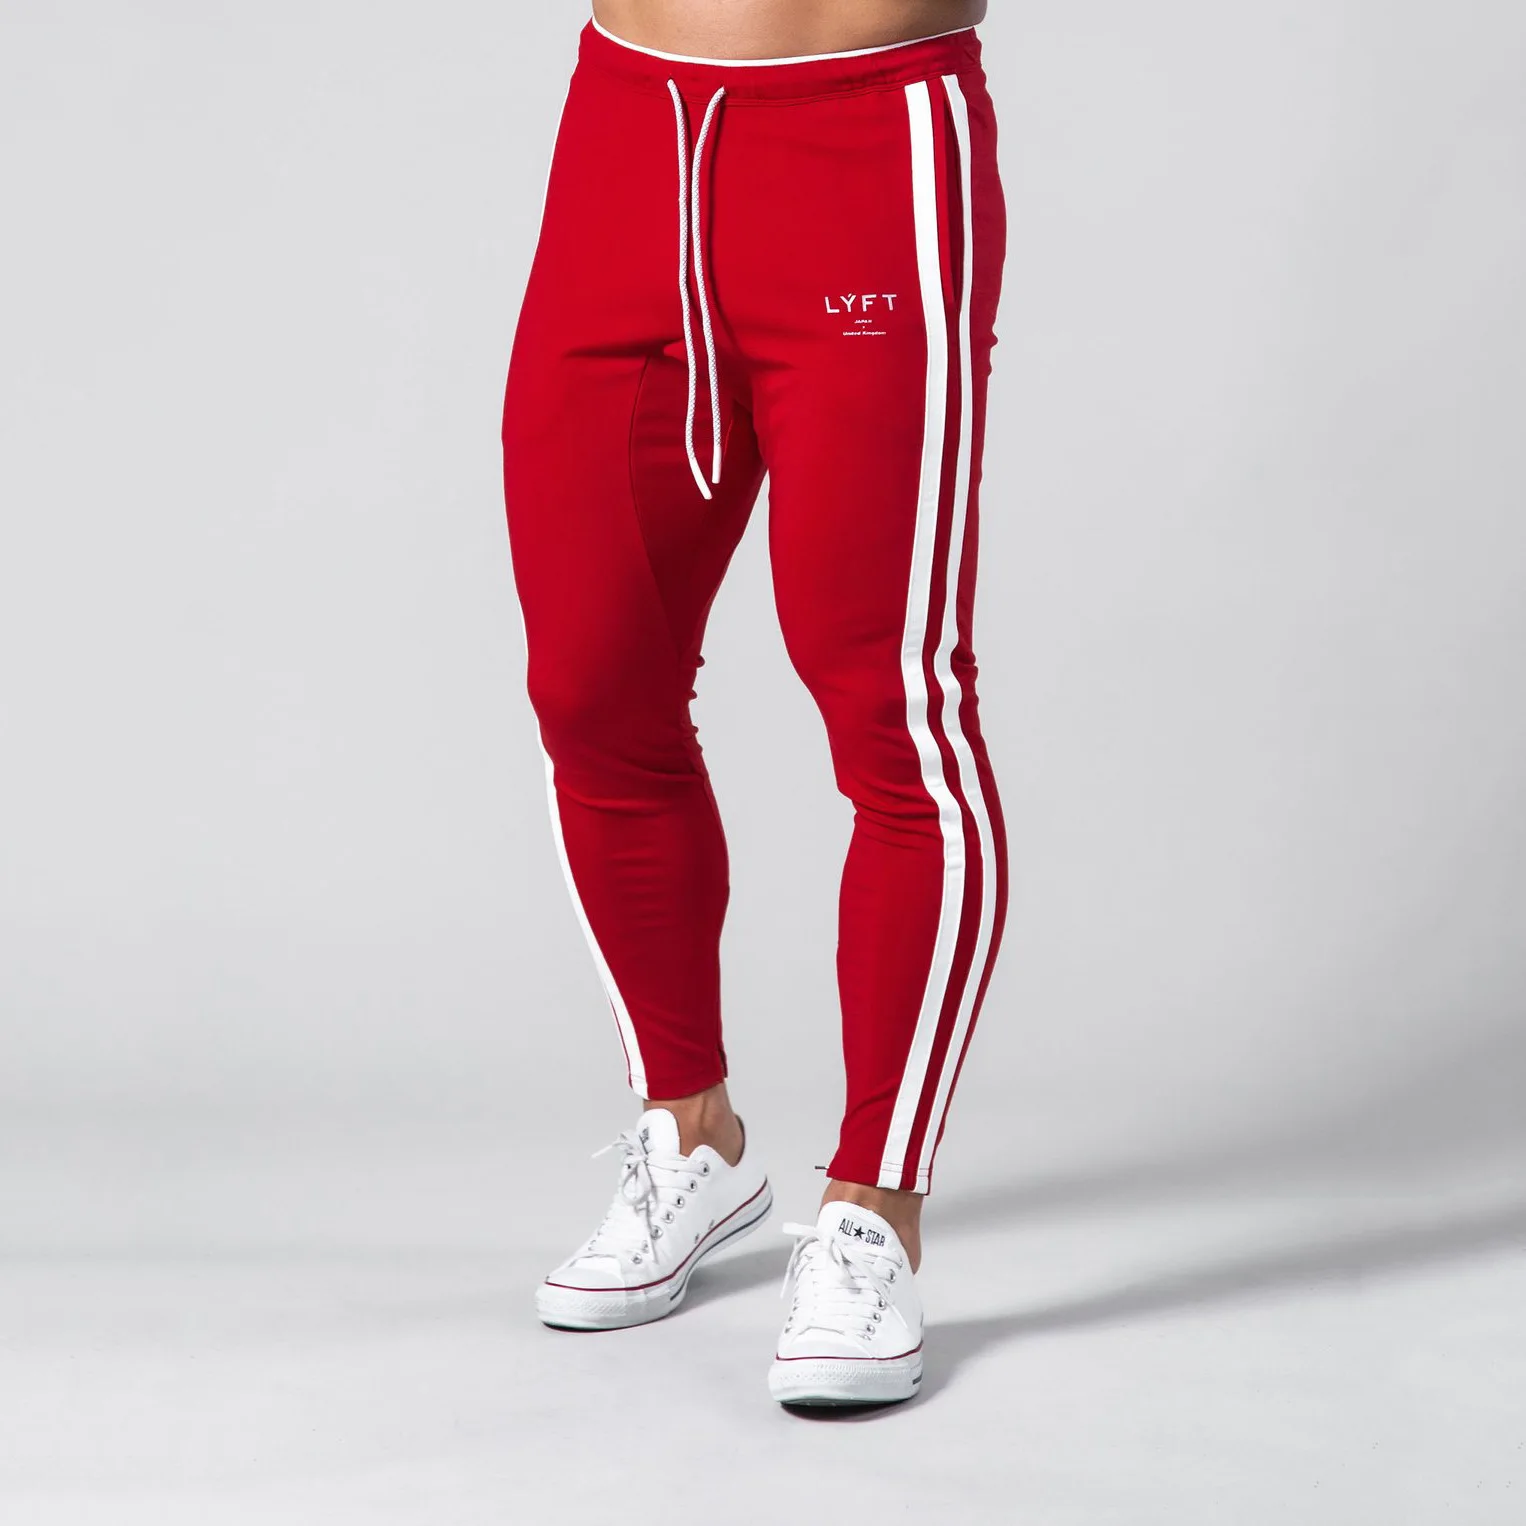 Red Side Striped Spring Autumn New Jogging Cotton Pants Men Casual Sports Trousers Men Gym Running Pants Outdoor Sweatpants